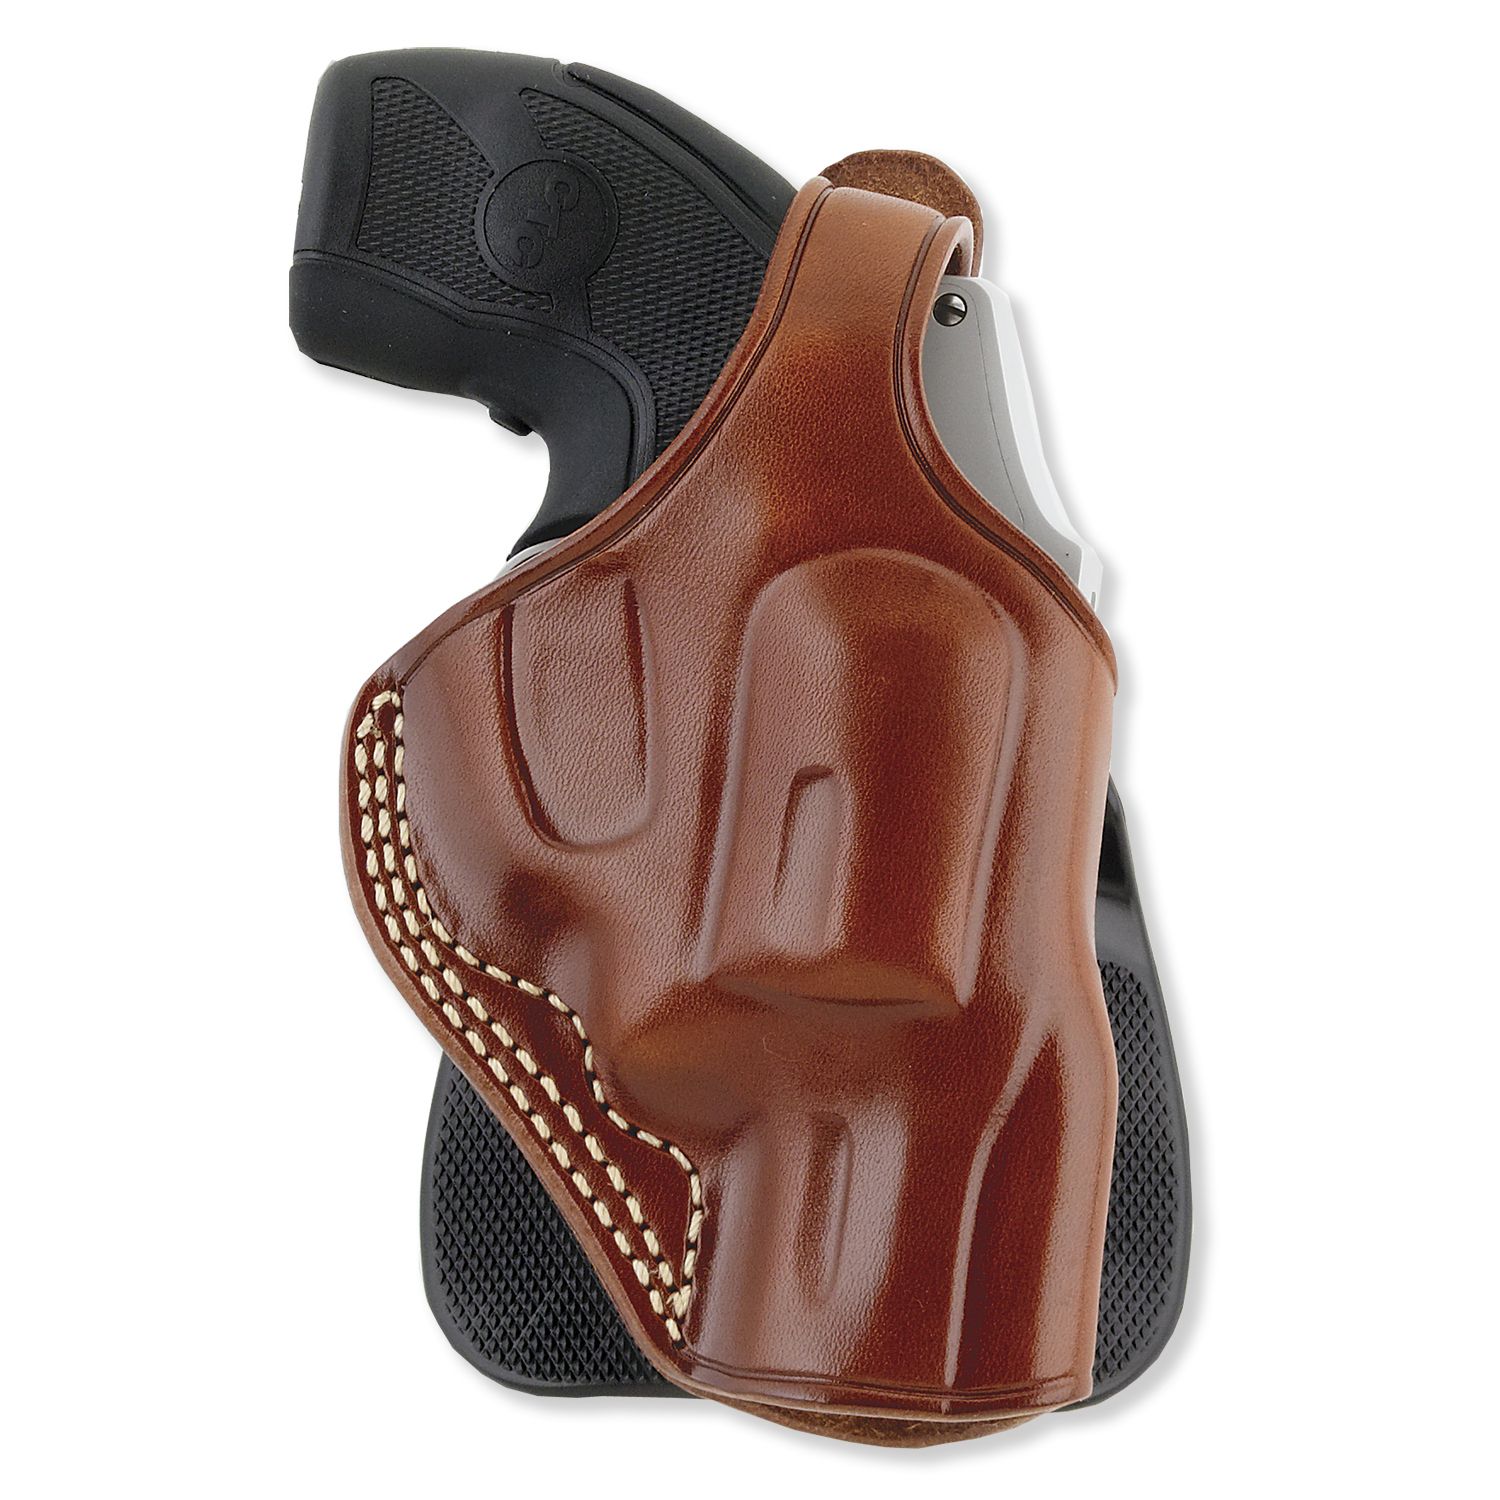 Galco Professional Law Enforcement Paddle Holster Right Hand Tan - : PLE212